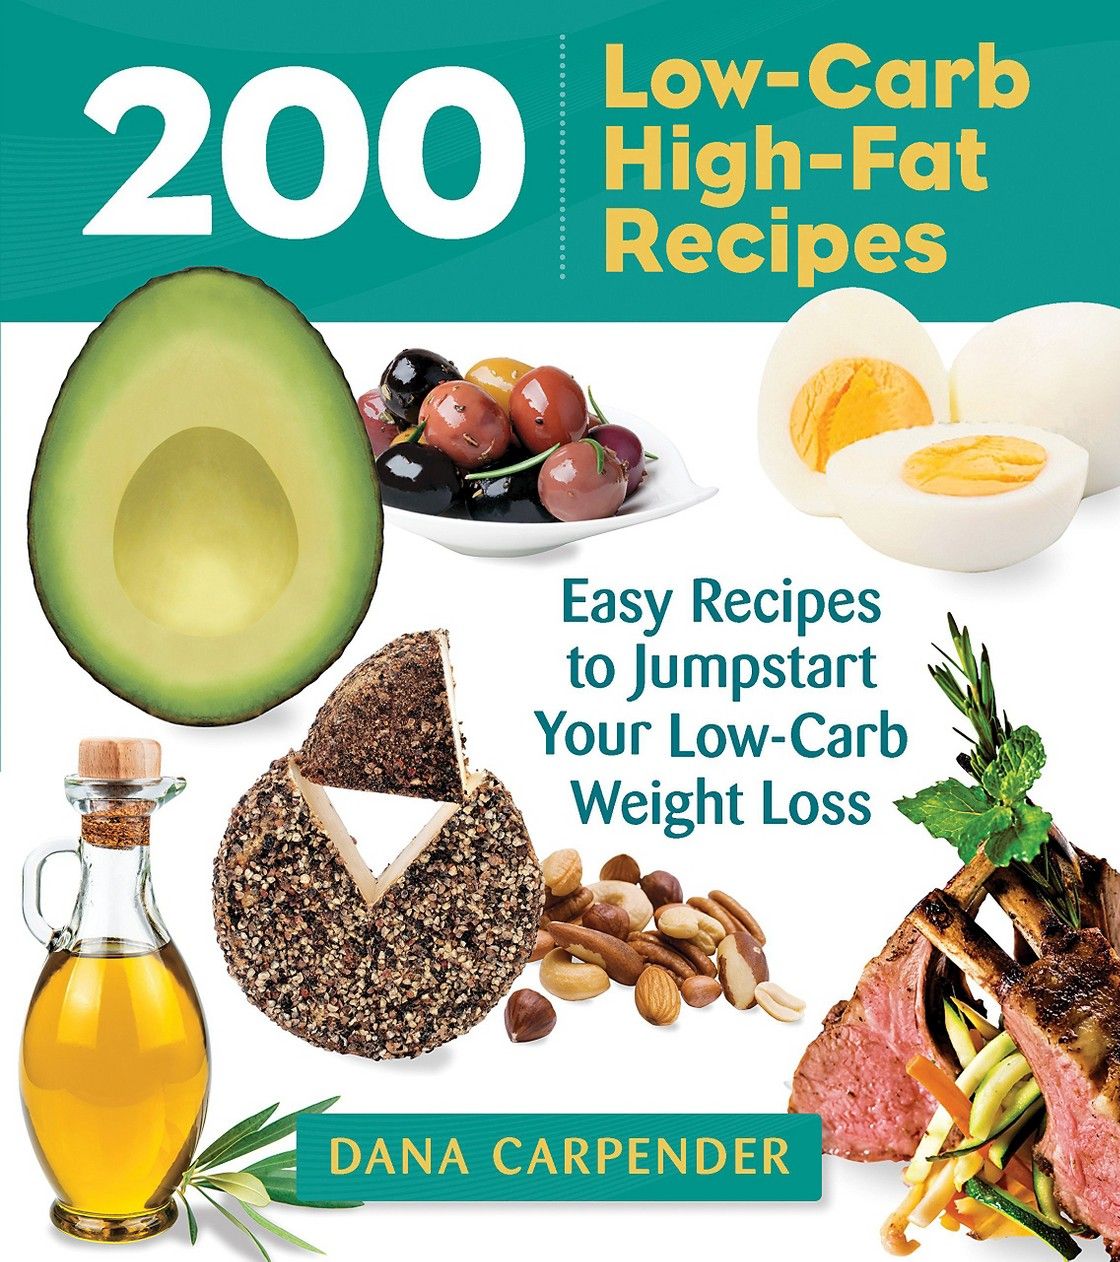 Pin on Low carb high fat (LcHf)